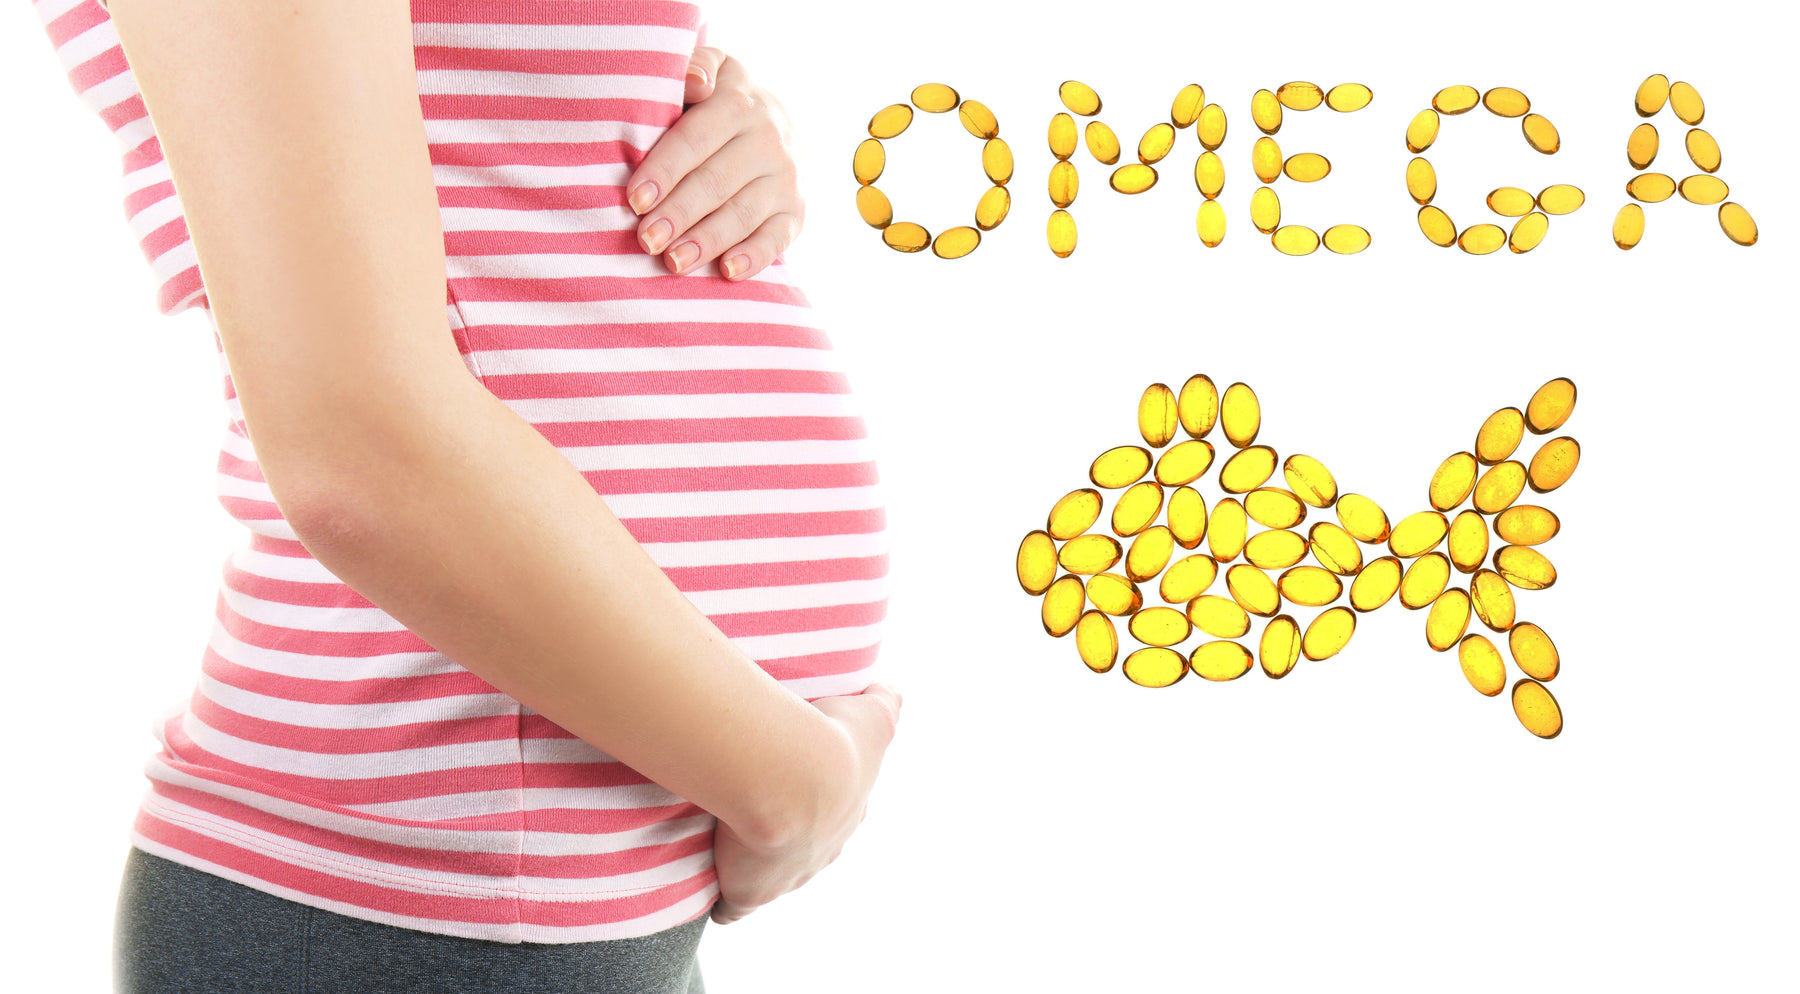 Fish Oil May Help Women Have Healthier Pregnancies and Babies